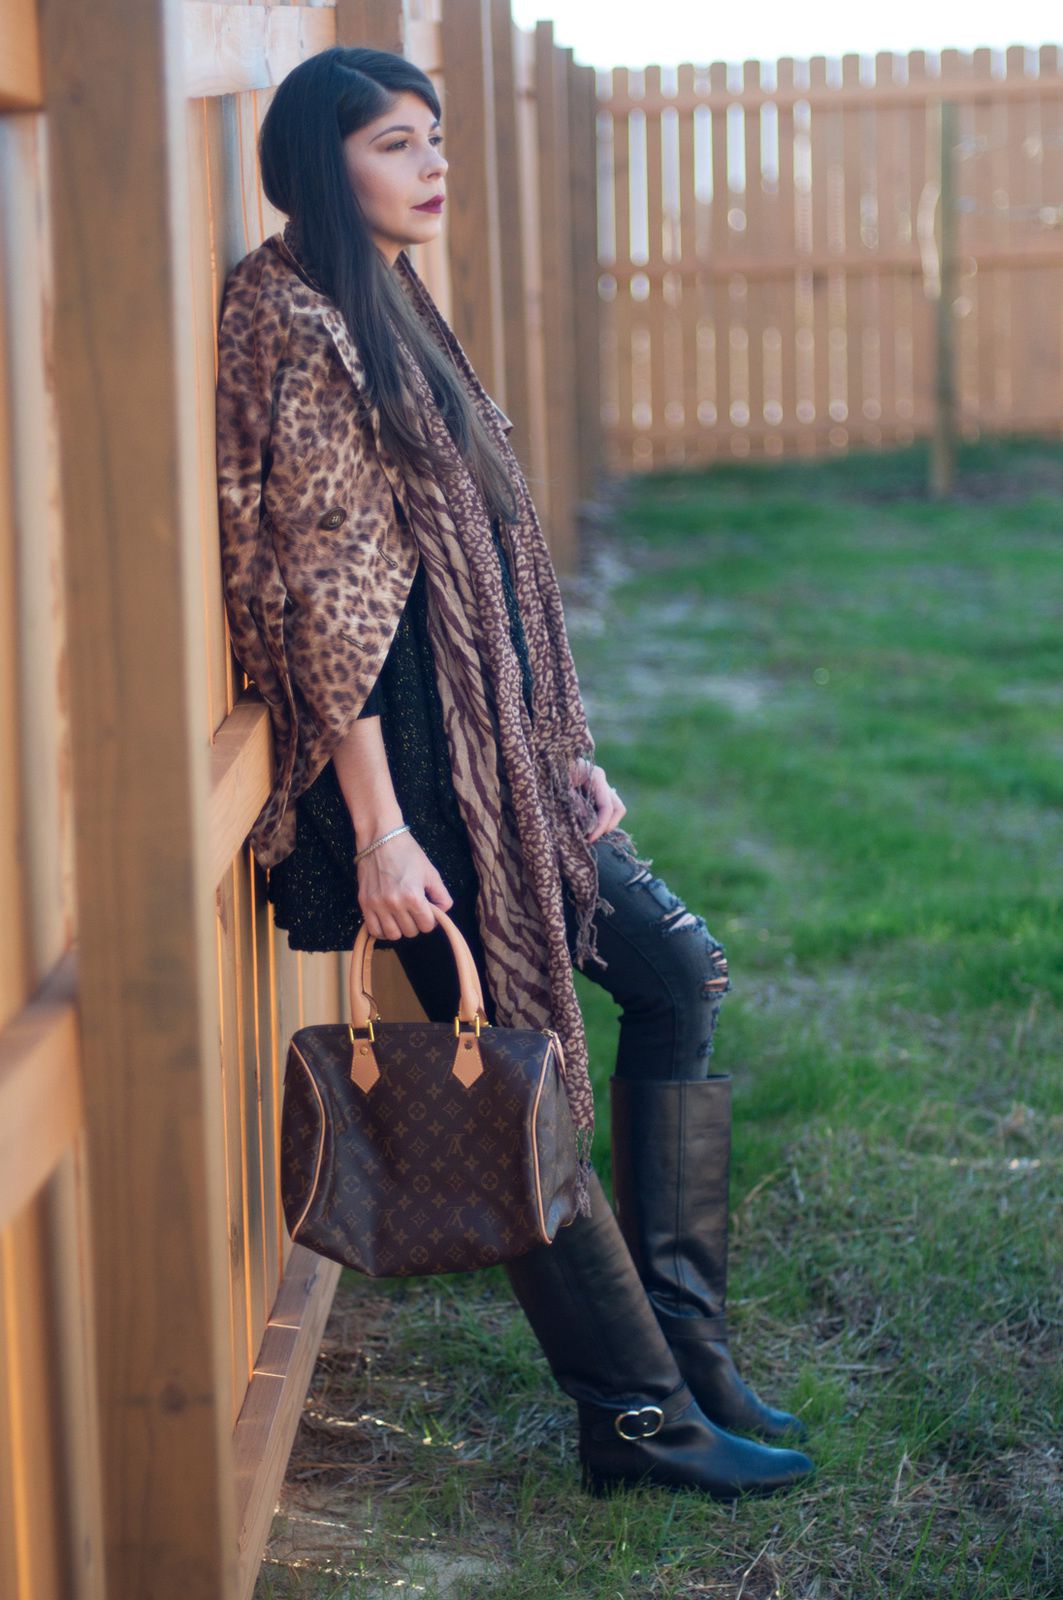 Leopard Trench Coat & Riding Boots